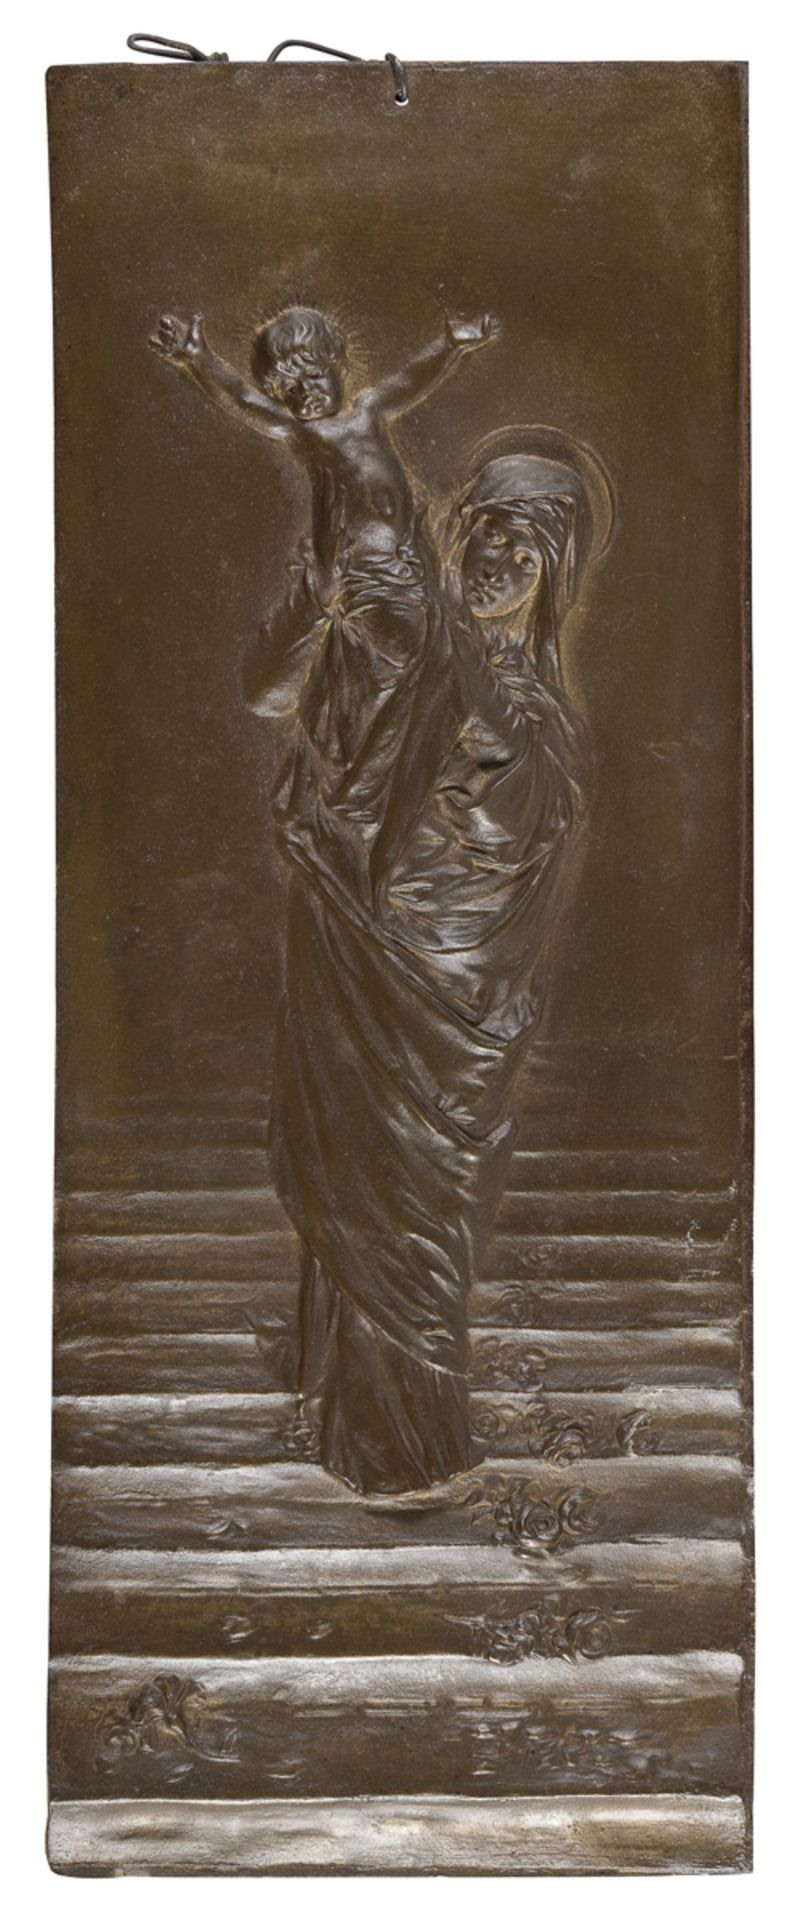 LEAD BAS-RELIEF EARLY 20TH CENTURY